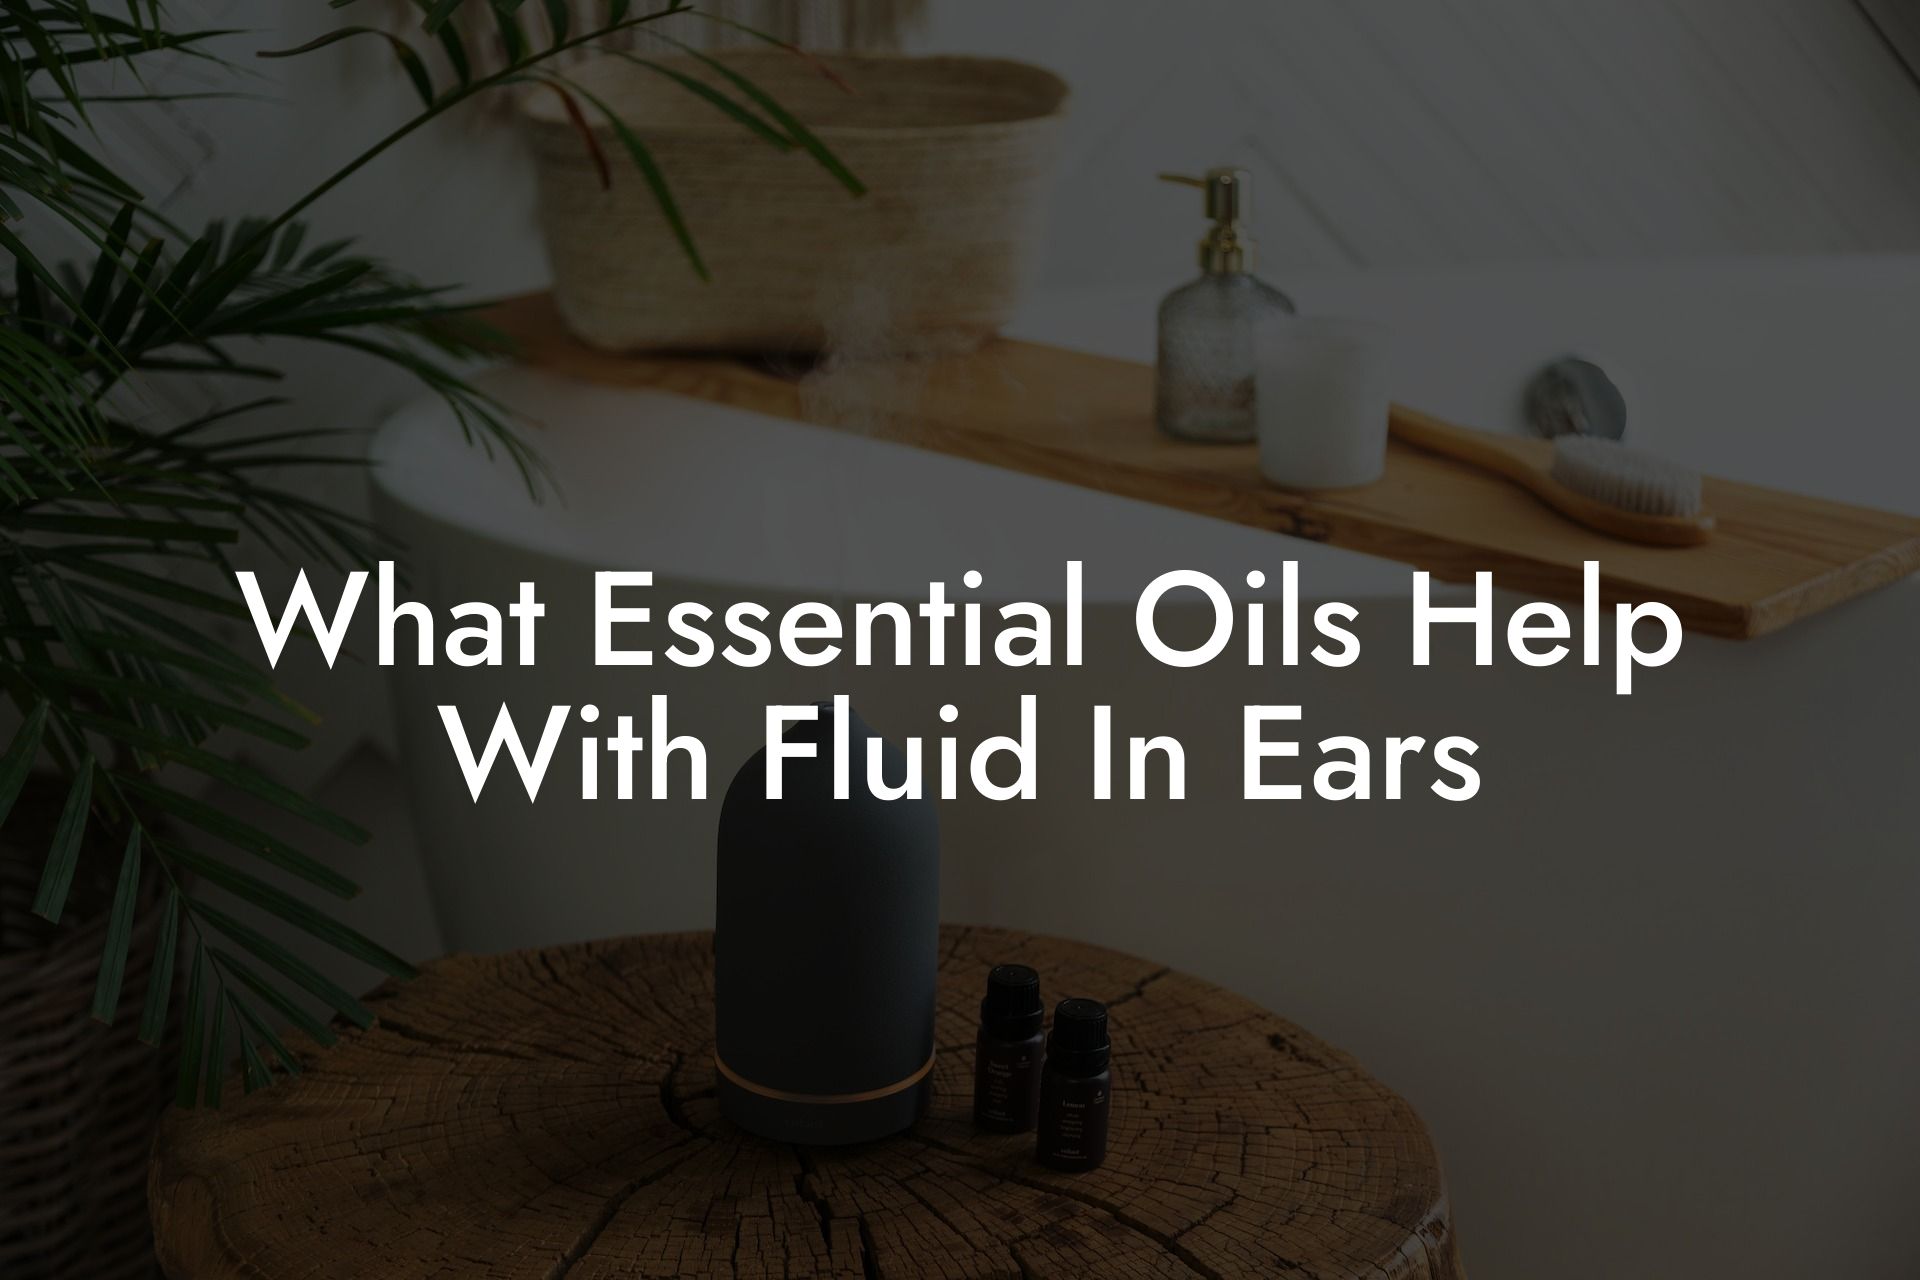 What Essential Oils Help With Fluid In Ears